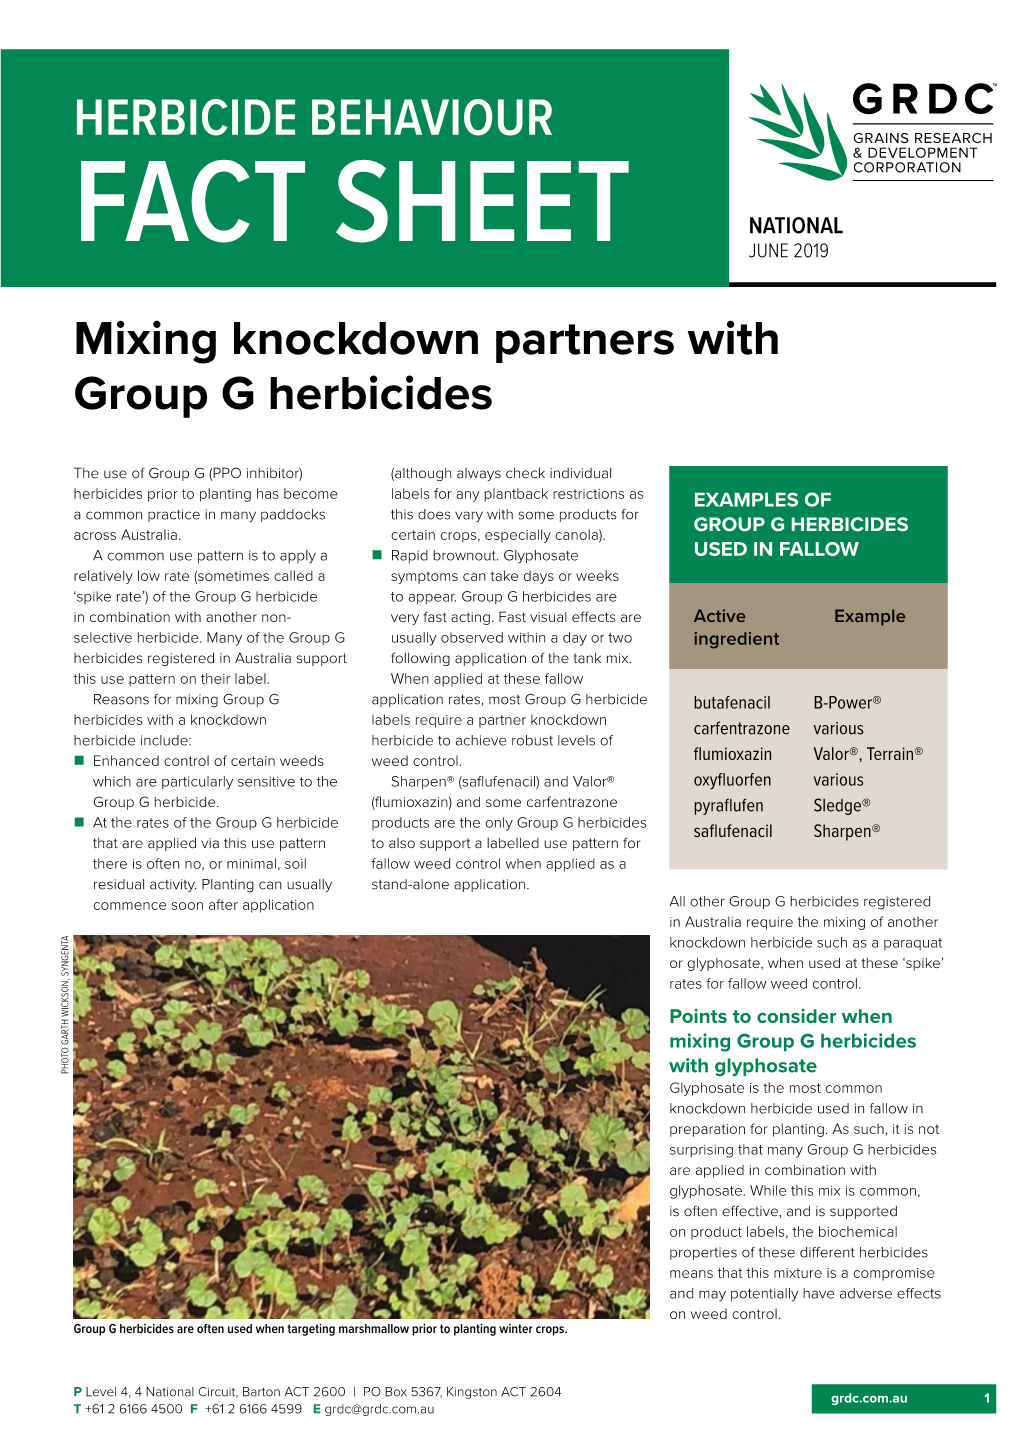 Mixing Knockdown Partners with Group G Herbicides